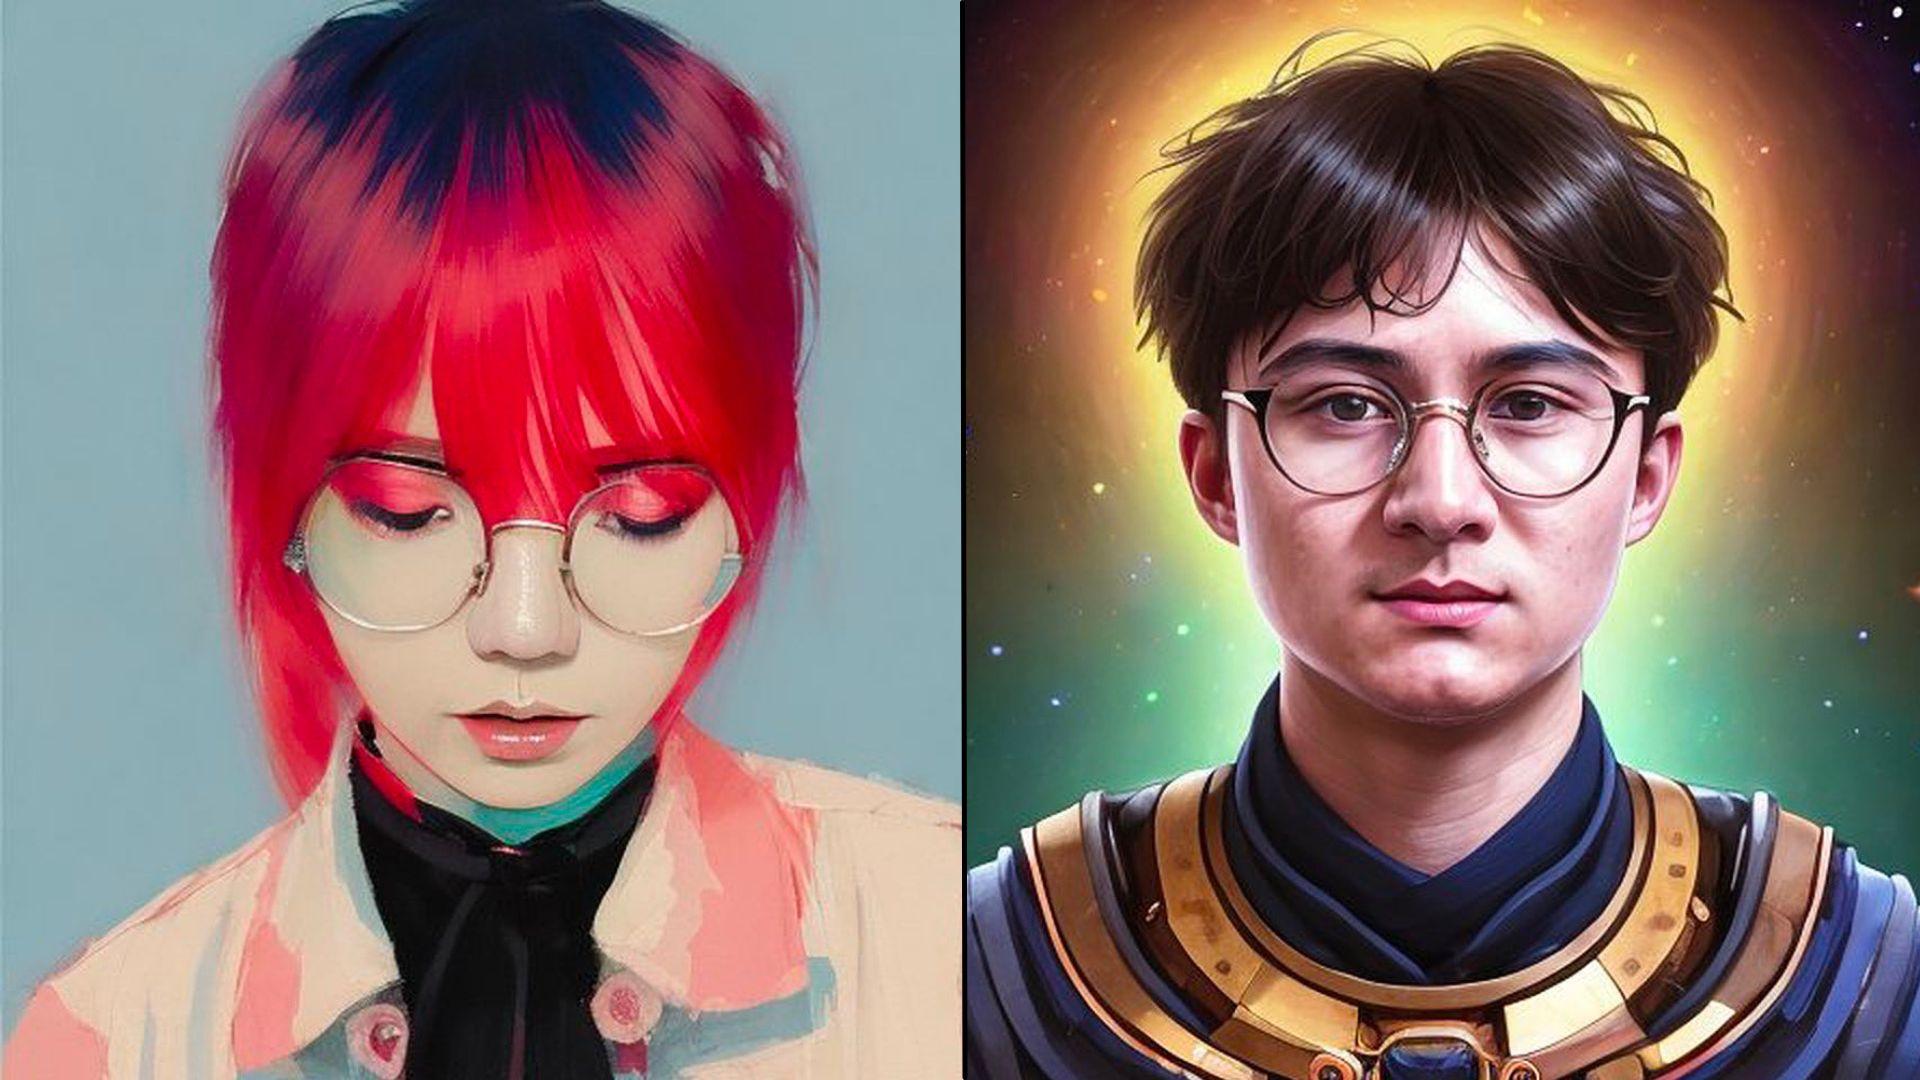 AI images of LilyPichu and Micahel Reeves